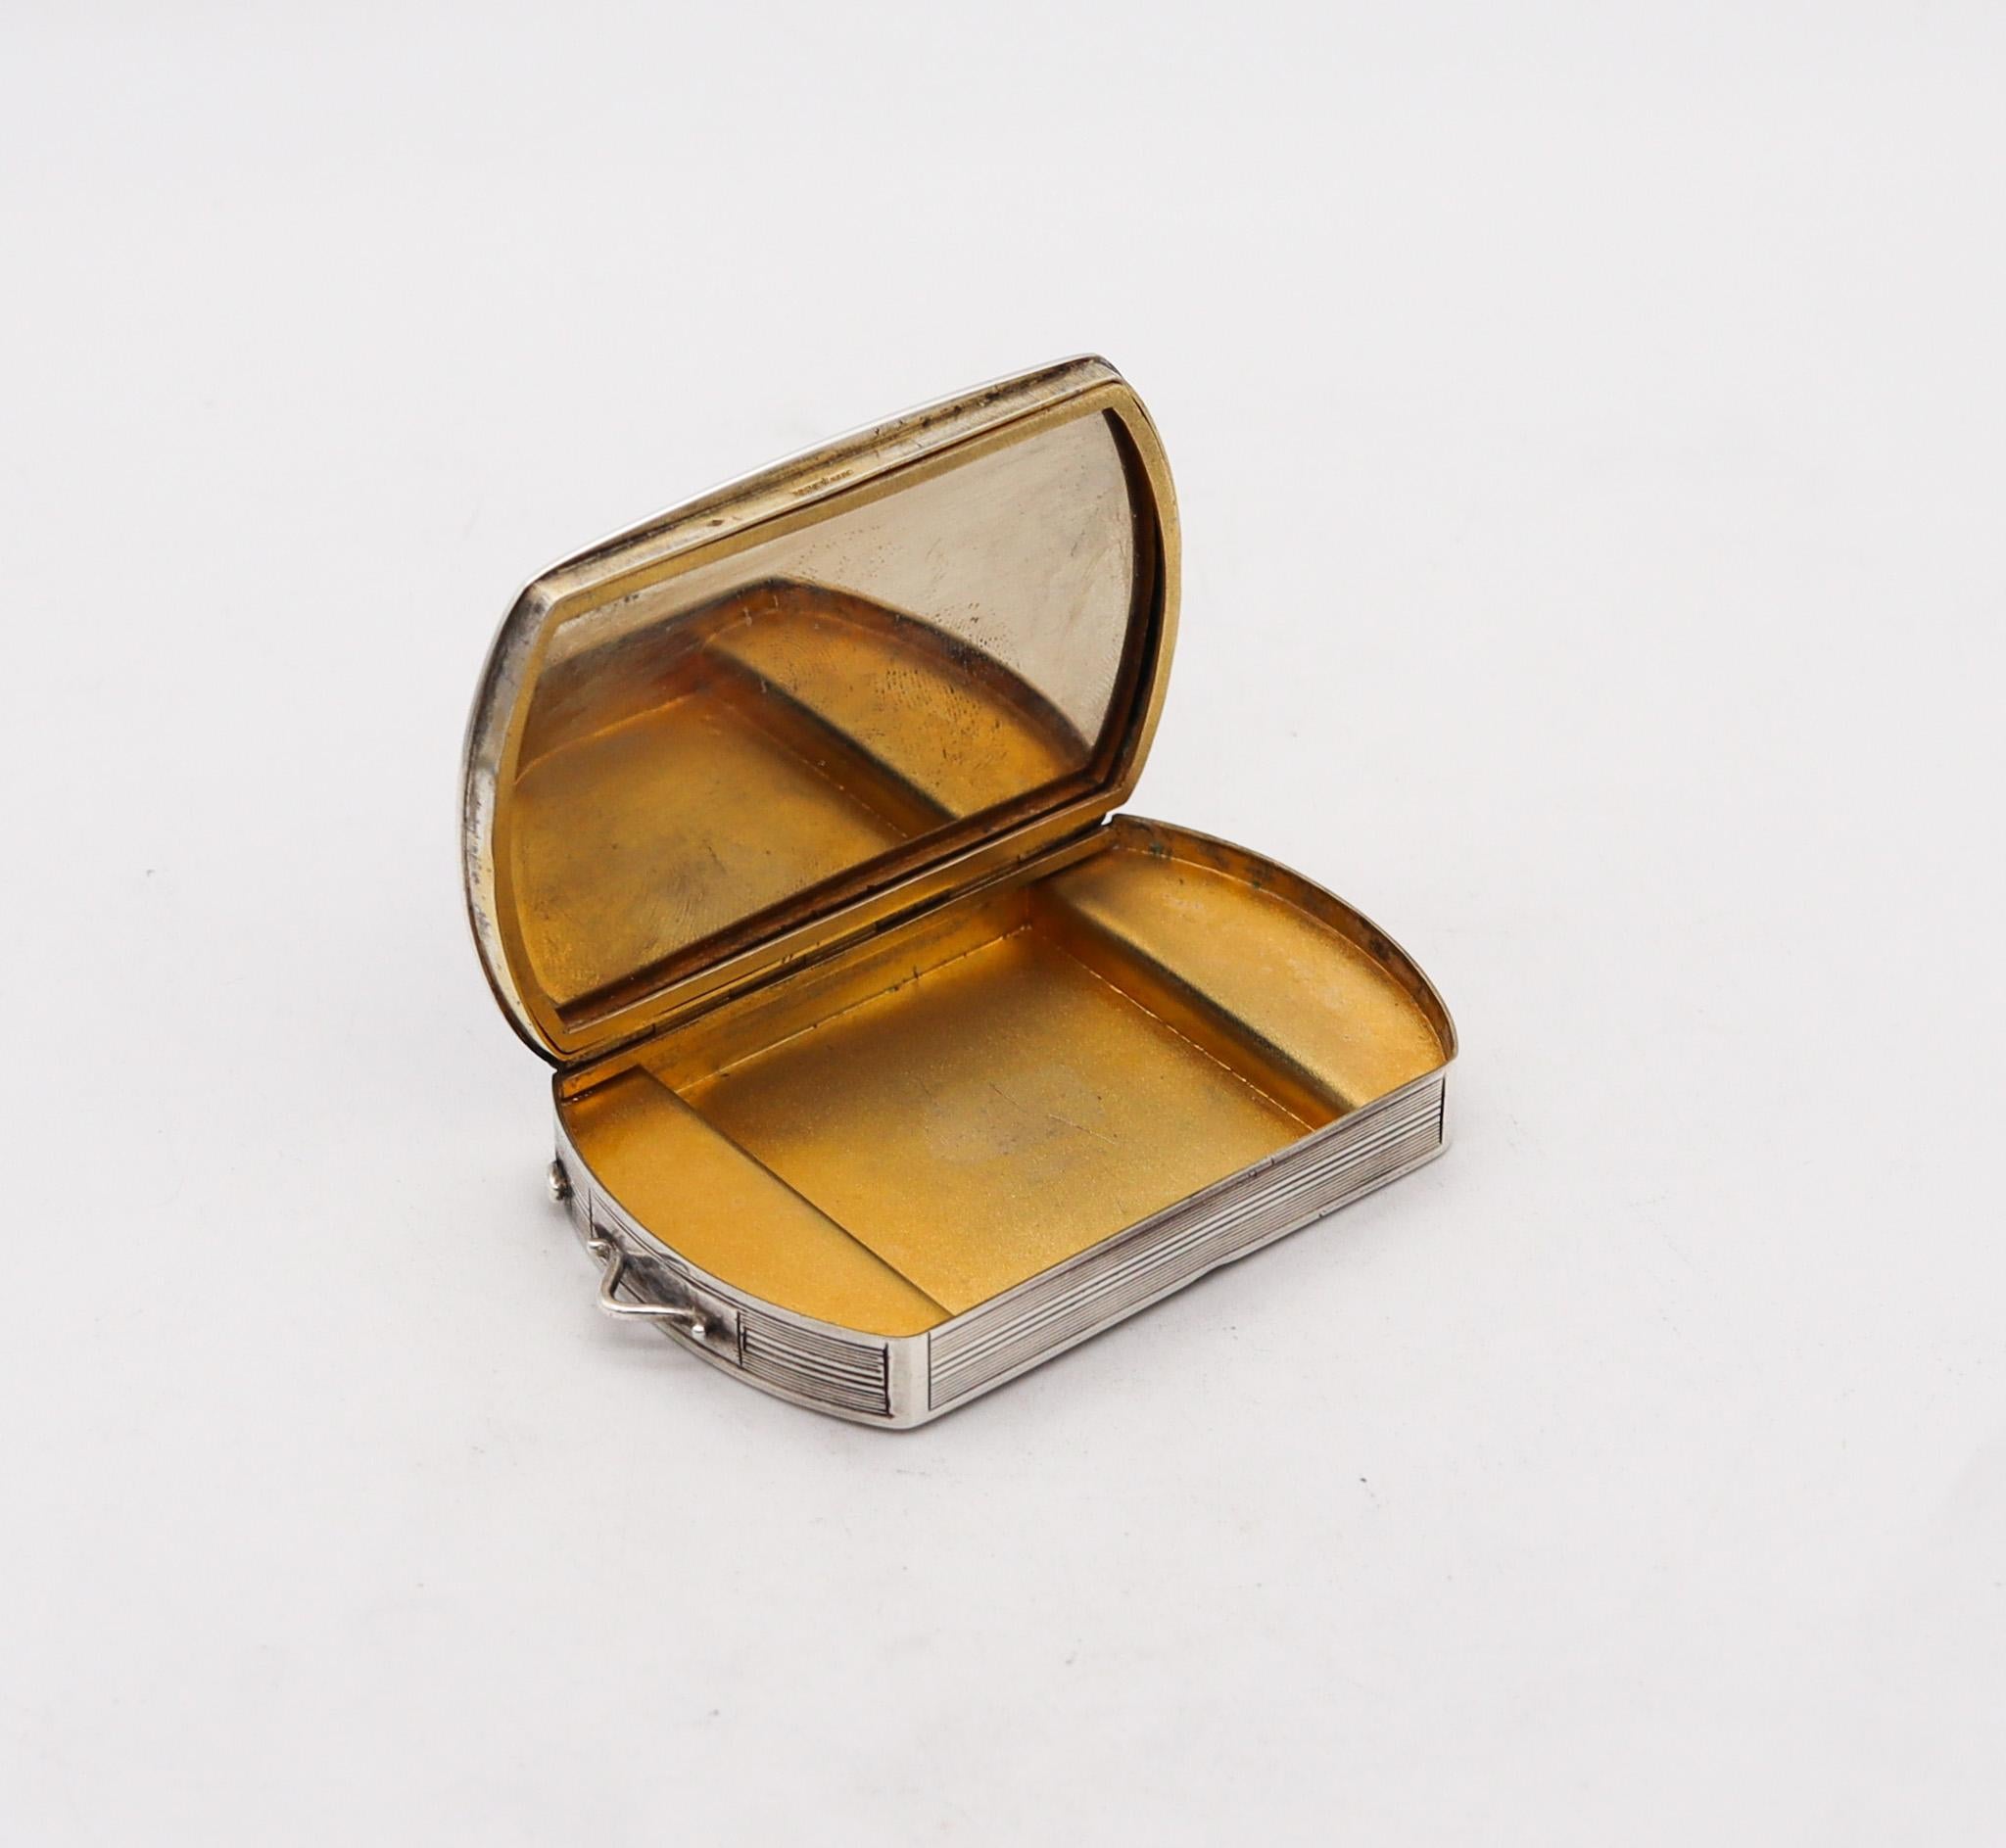 A French guilloche enameled pill box.

Beautiful French enamelled mechanical compact, created Paris during the art deco period, circa 1925. This beautiful box was carefully crafted with impeccable details in solid .925/.999 standard silver. The